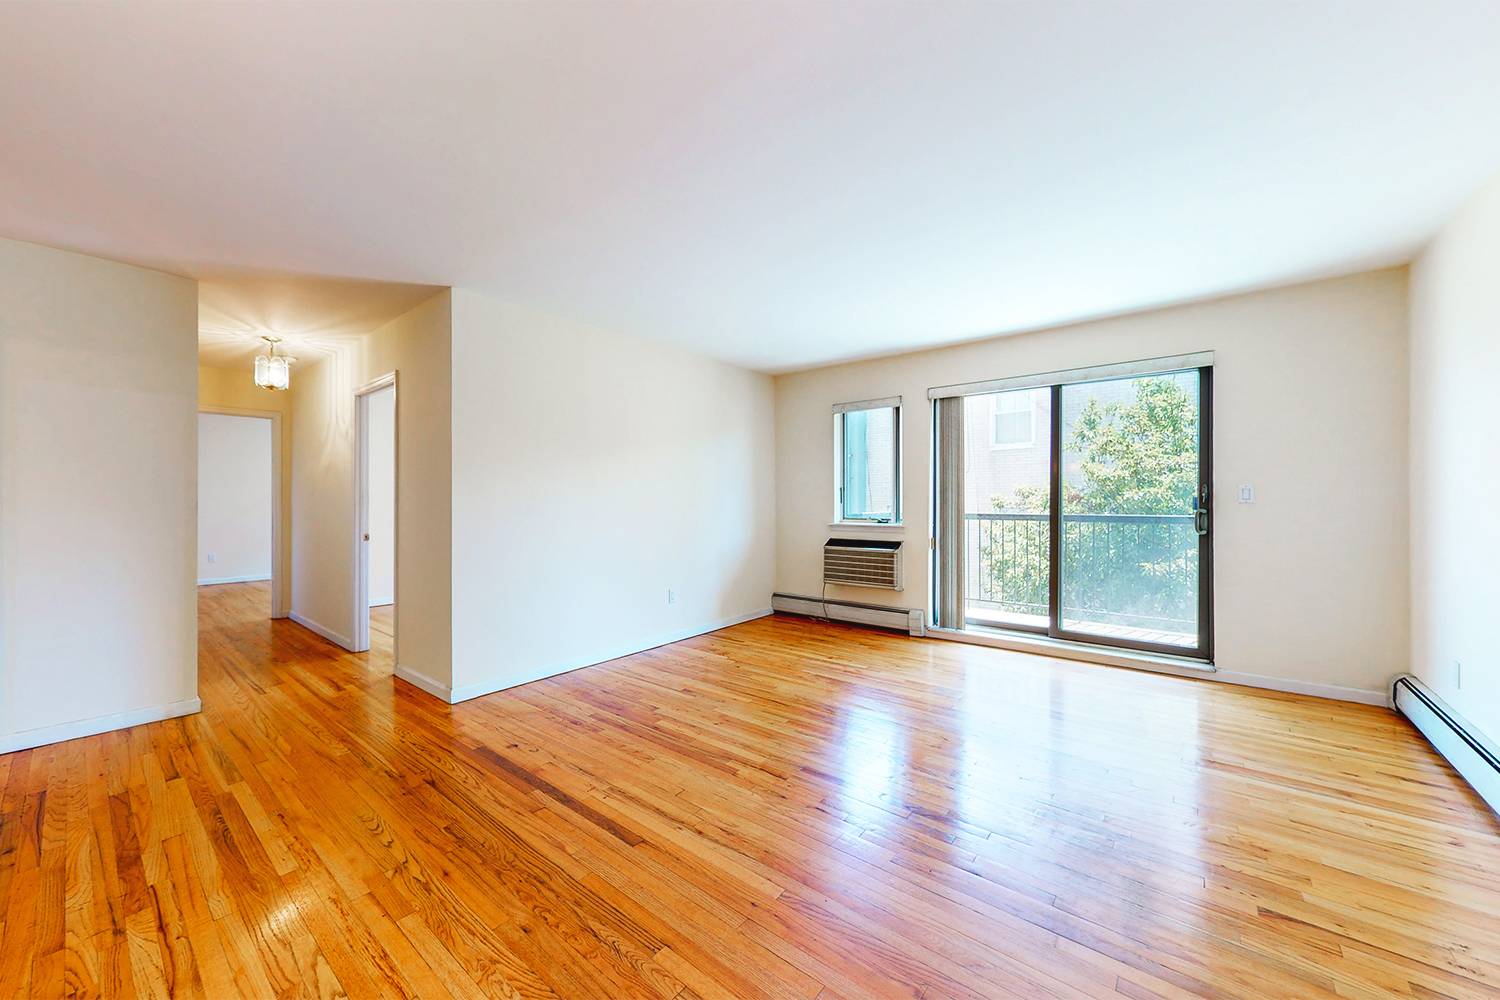 Just Reduced ! Sunny and spacious Bay Ridge Condominium, with private outdoor space and deeded parking !